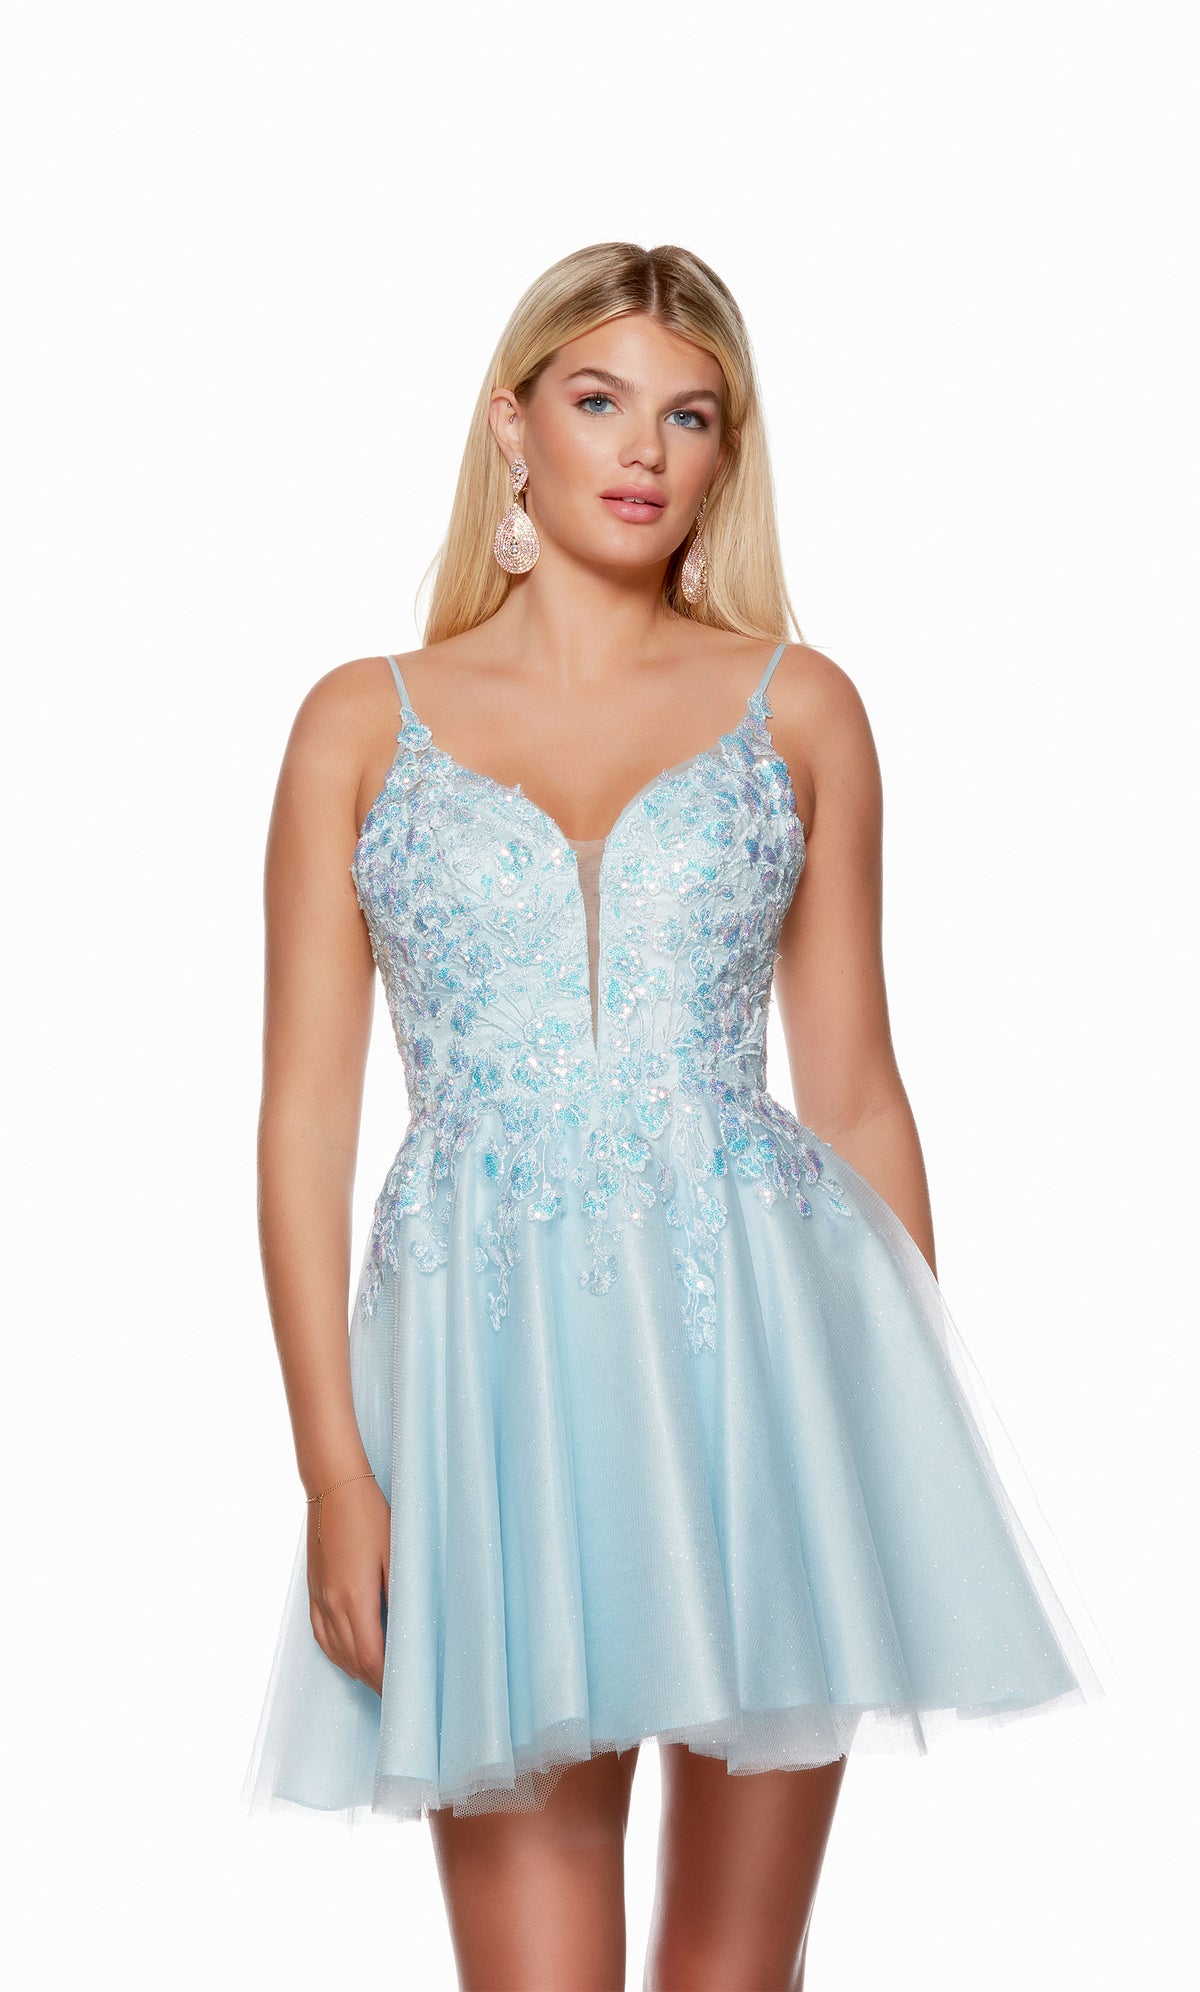 A short, glitter embellished light blue homecoming dress with an A-line silhouette, adorned with gorgeous floral lace appliques.